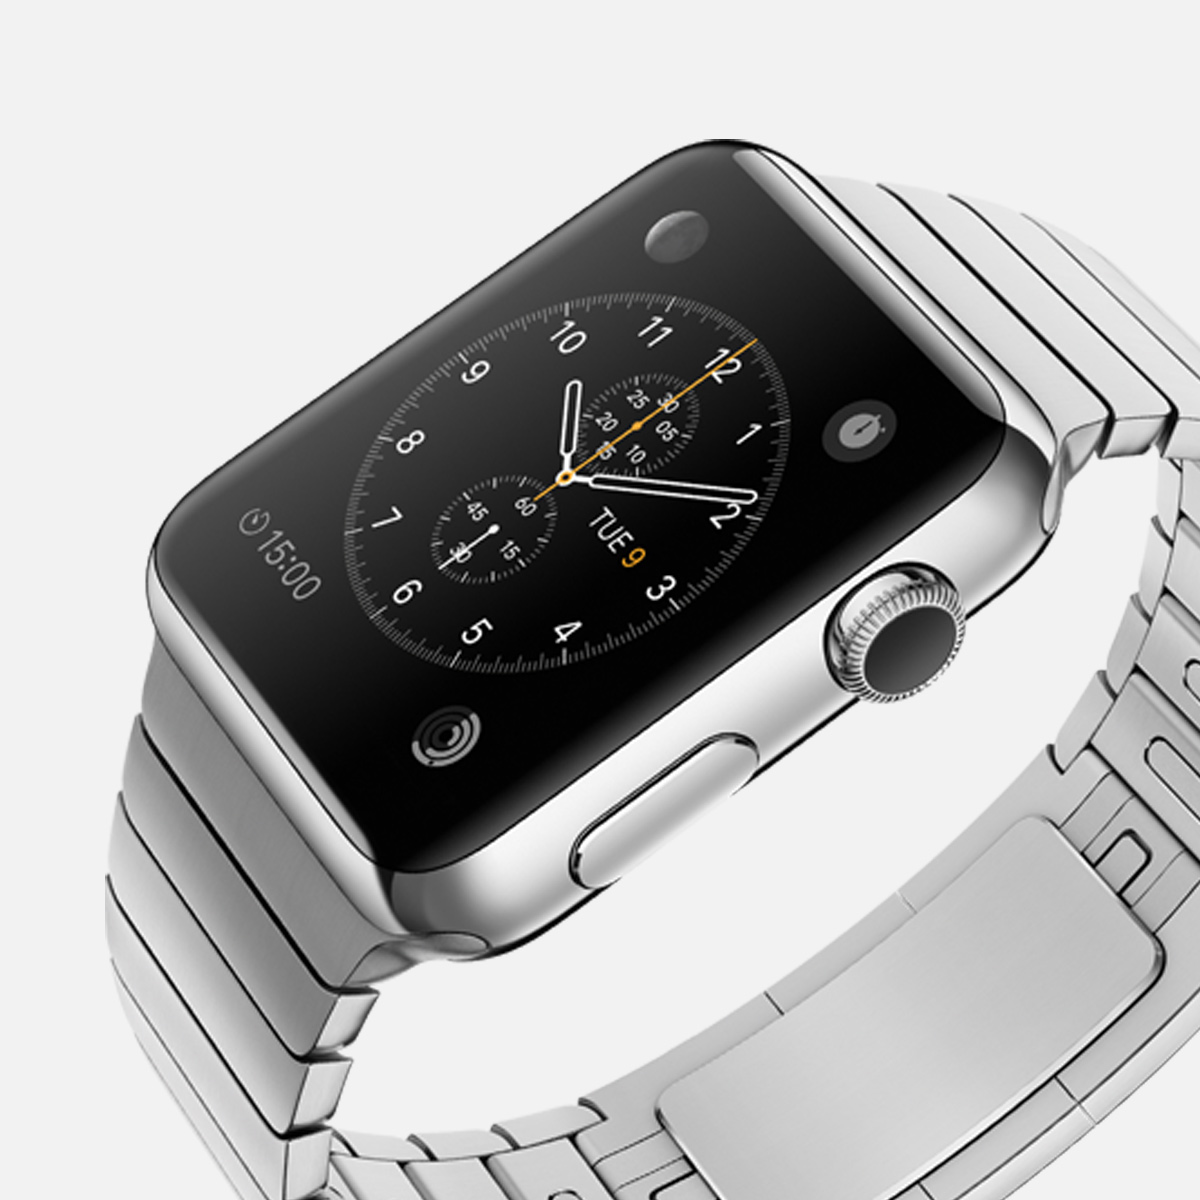 Apple Watch, The Smart Luxury Watches